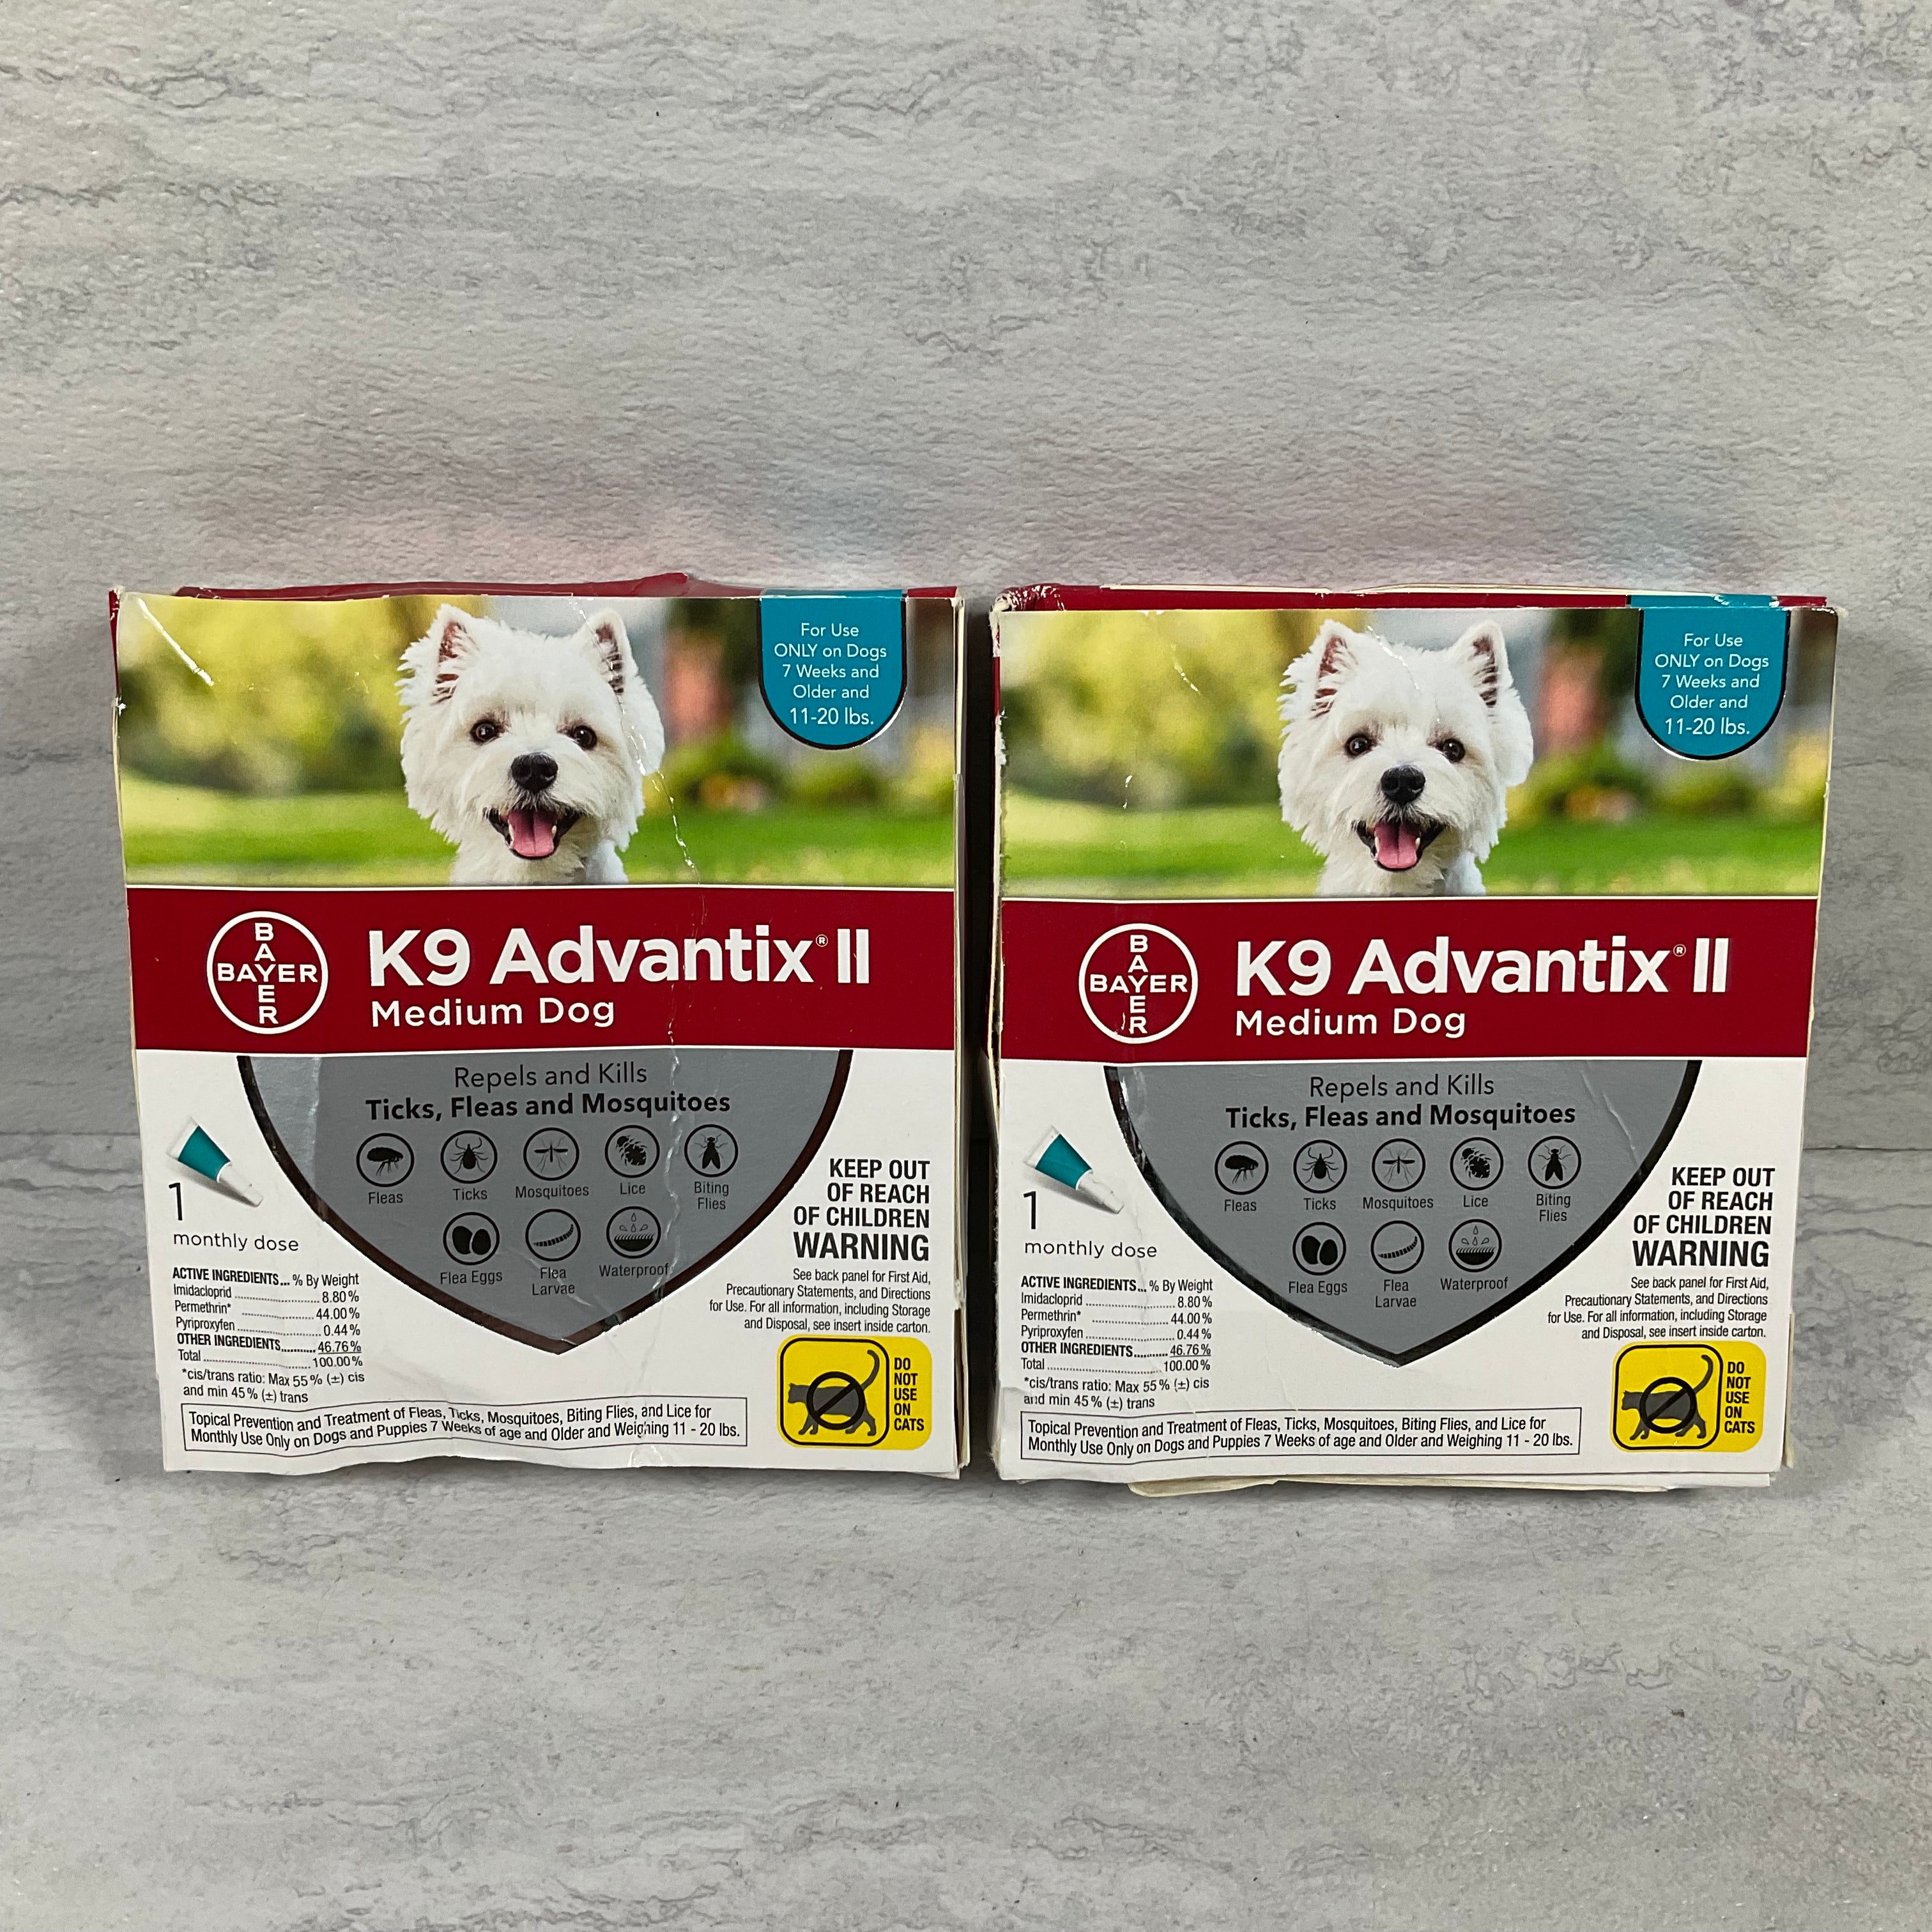 (2-Pack) K9 Advantix II Flea and Tick Prevention for Medium Dogs, 11-20 Pounds (7339673321710)